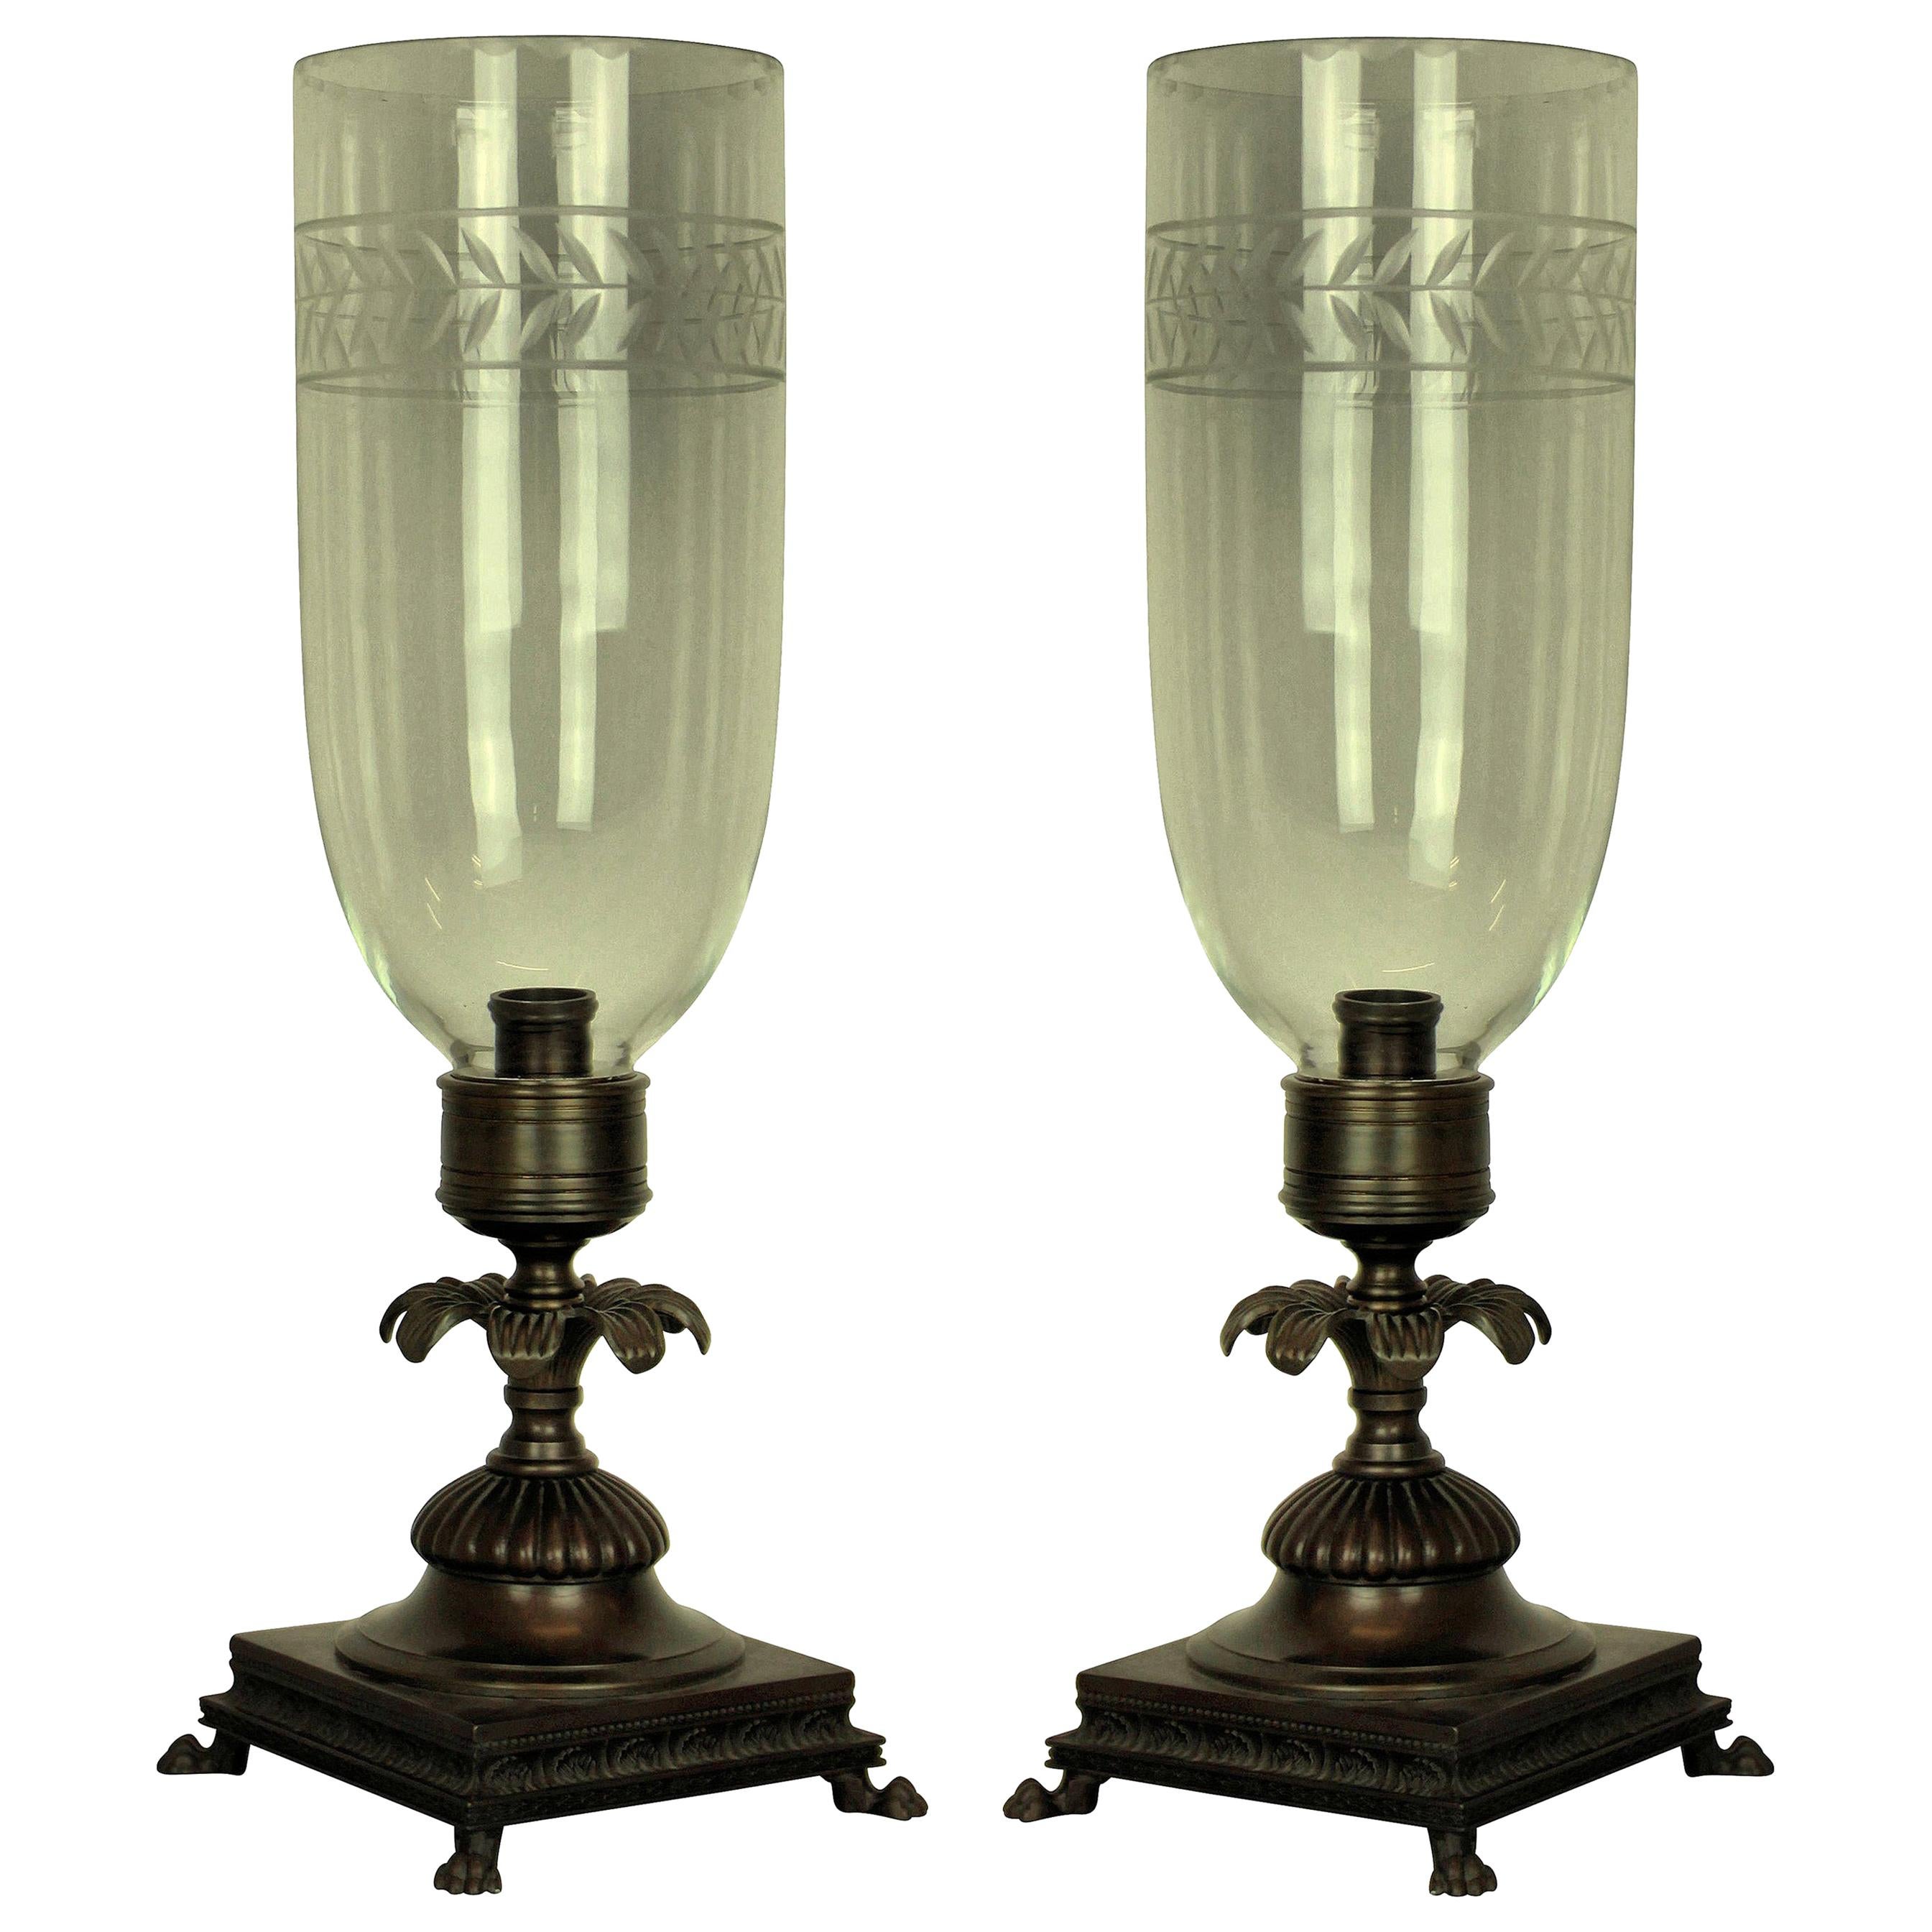 Pair of Regency Style Candlesticks with Storm Lights